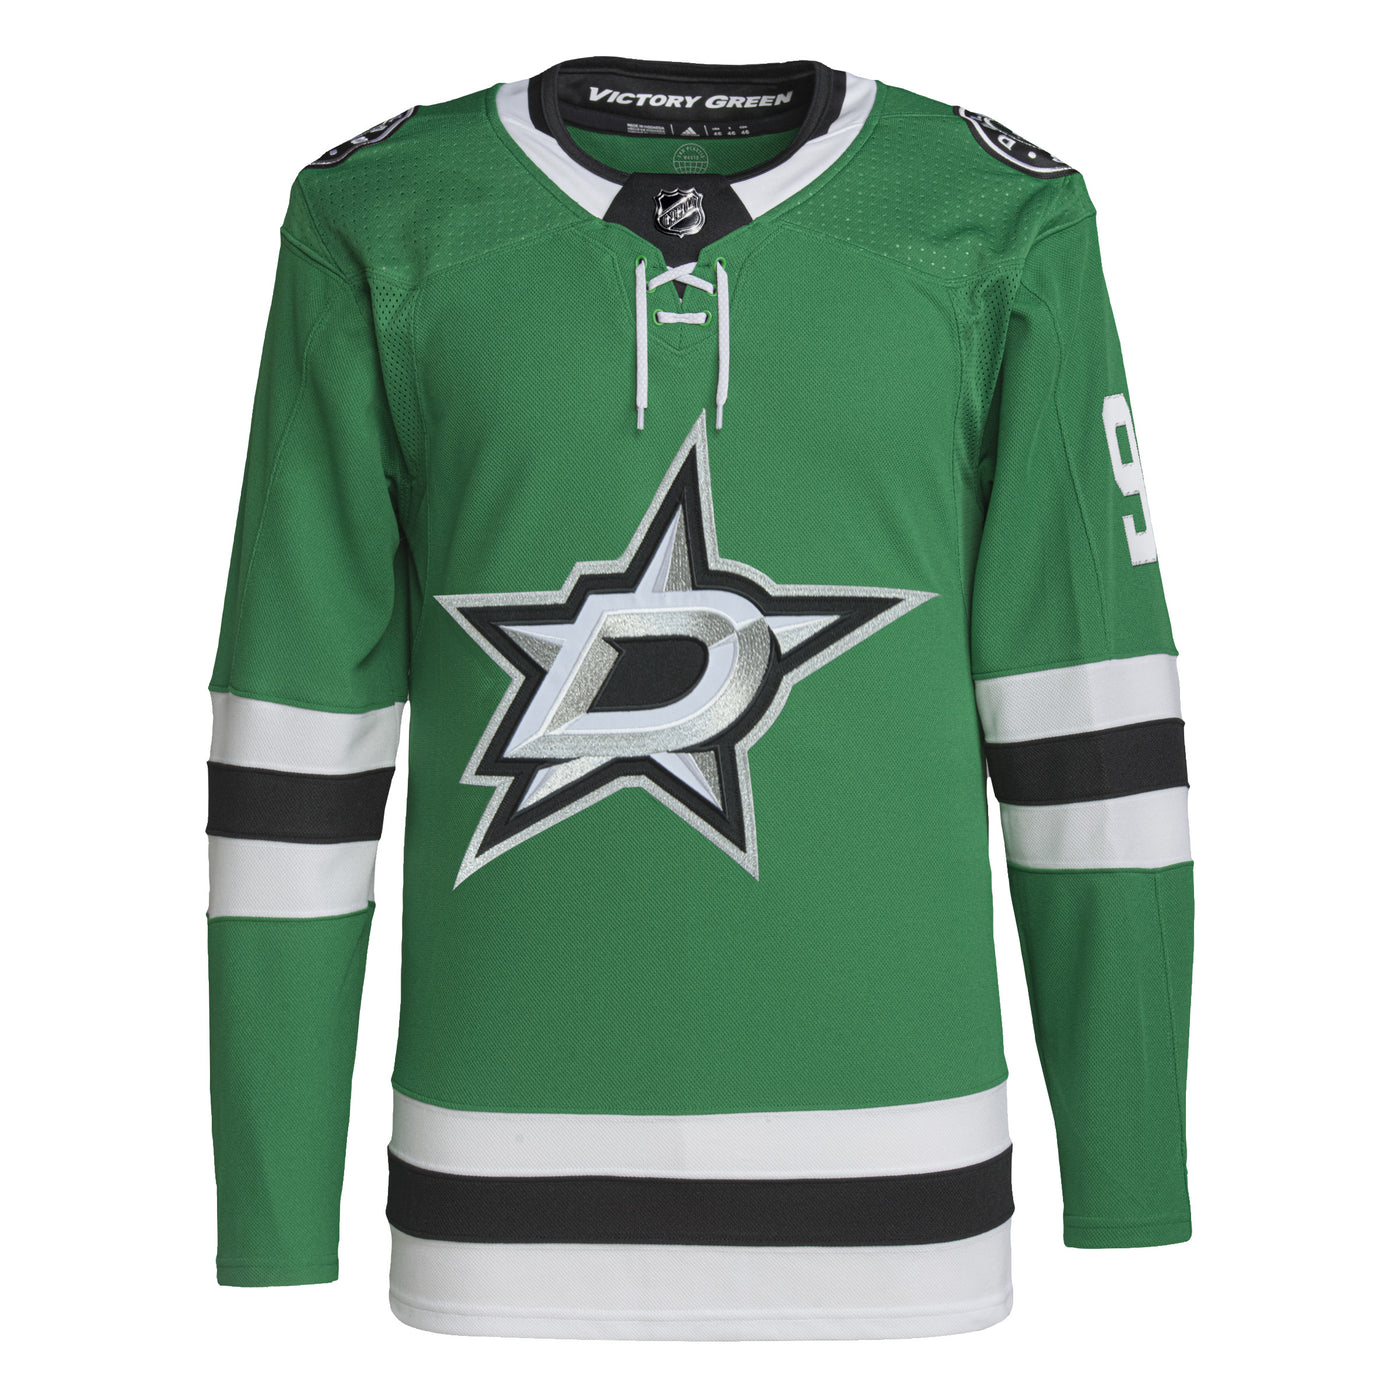 Dallas Stars Adidas Authentic Pro Home Tyler Seguin Jersey - Front